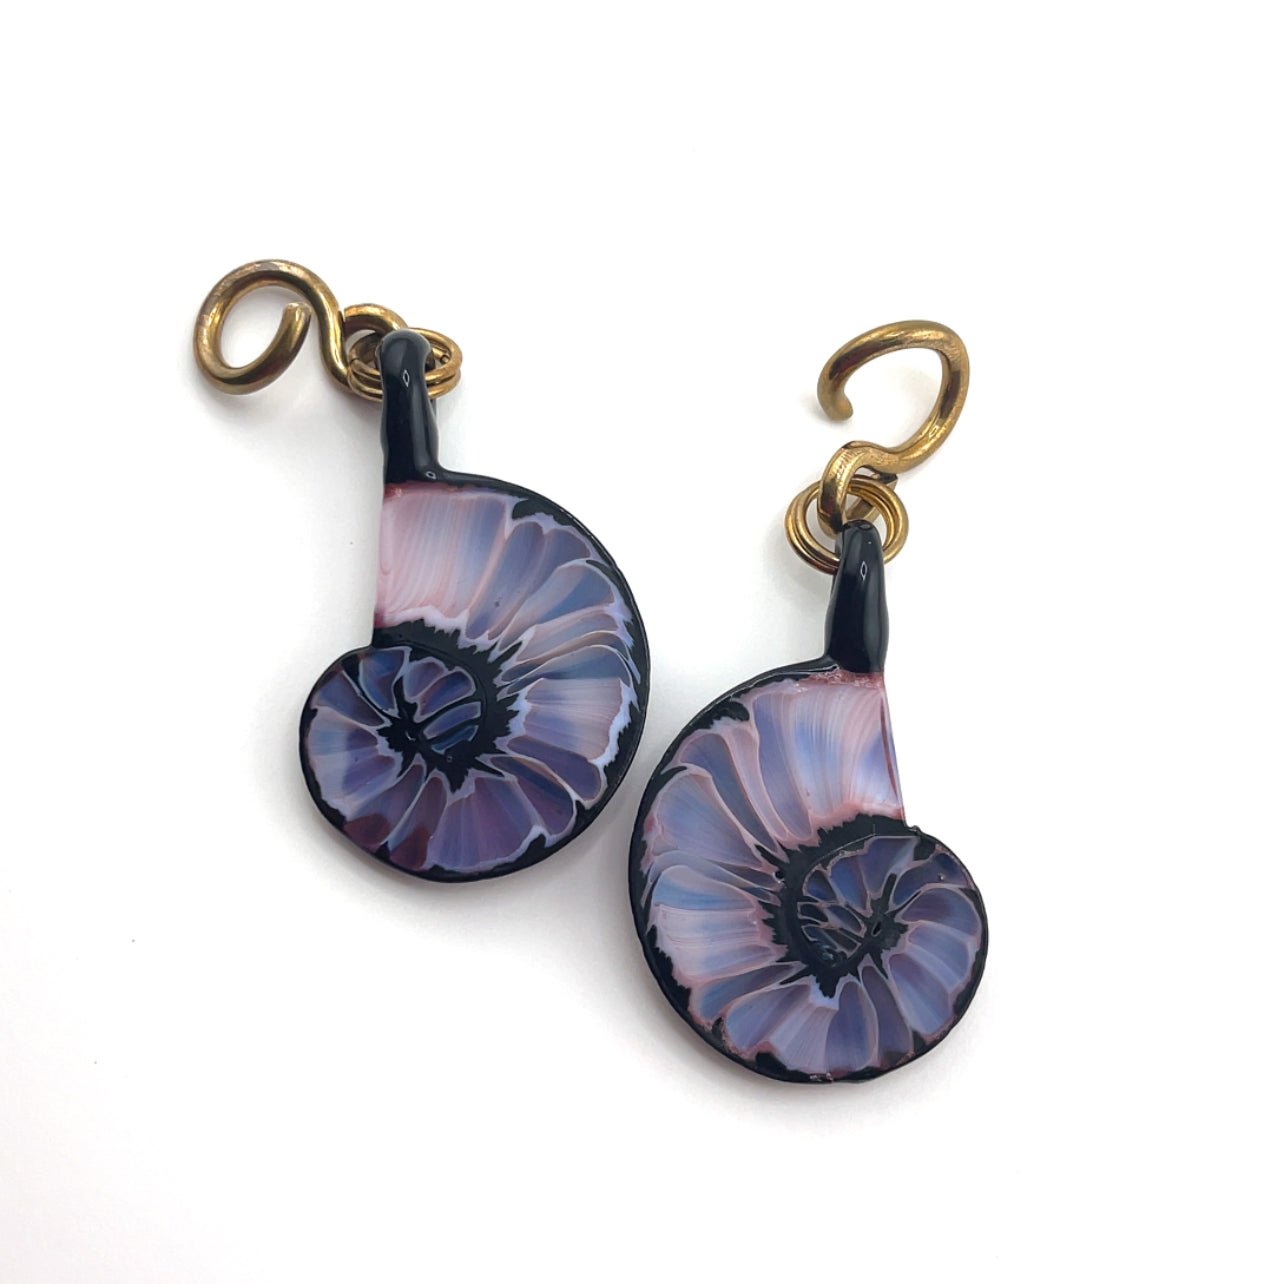 Ammonite Weights 8g - Pair - Agave in Bloom